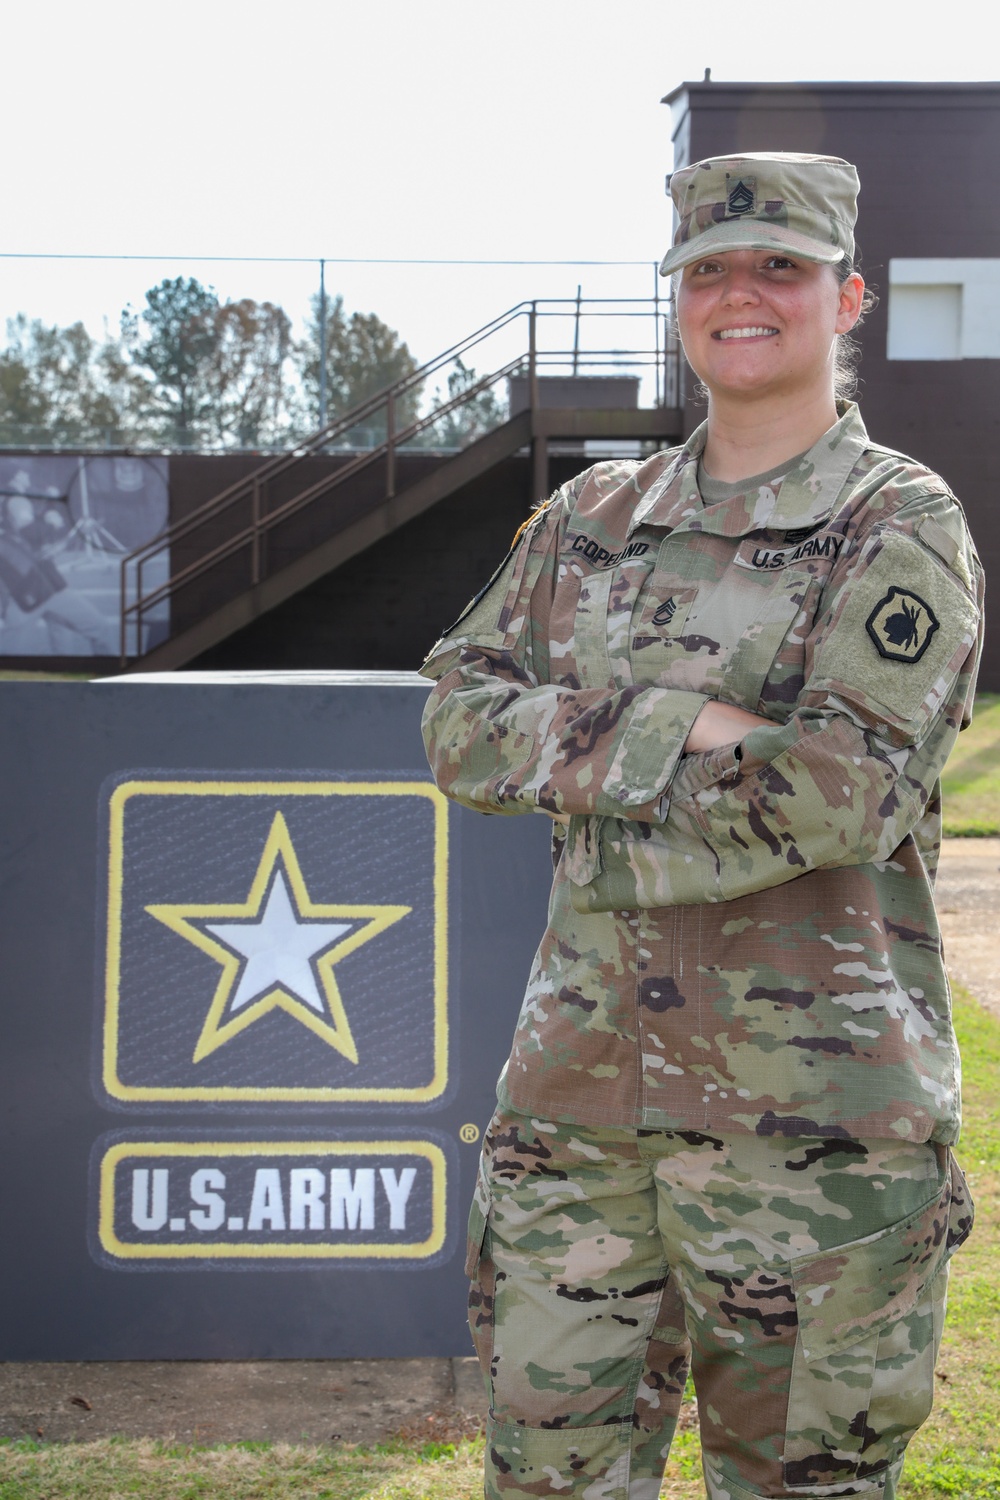 U.S. Army Reserve Soldier earns Purple Heart and finds purpose through service to Nation